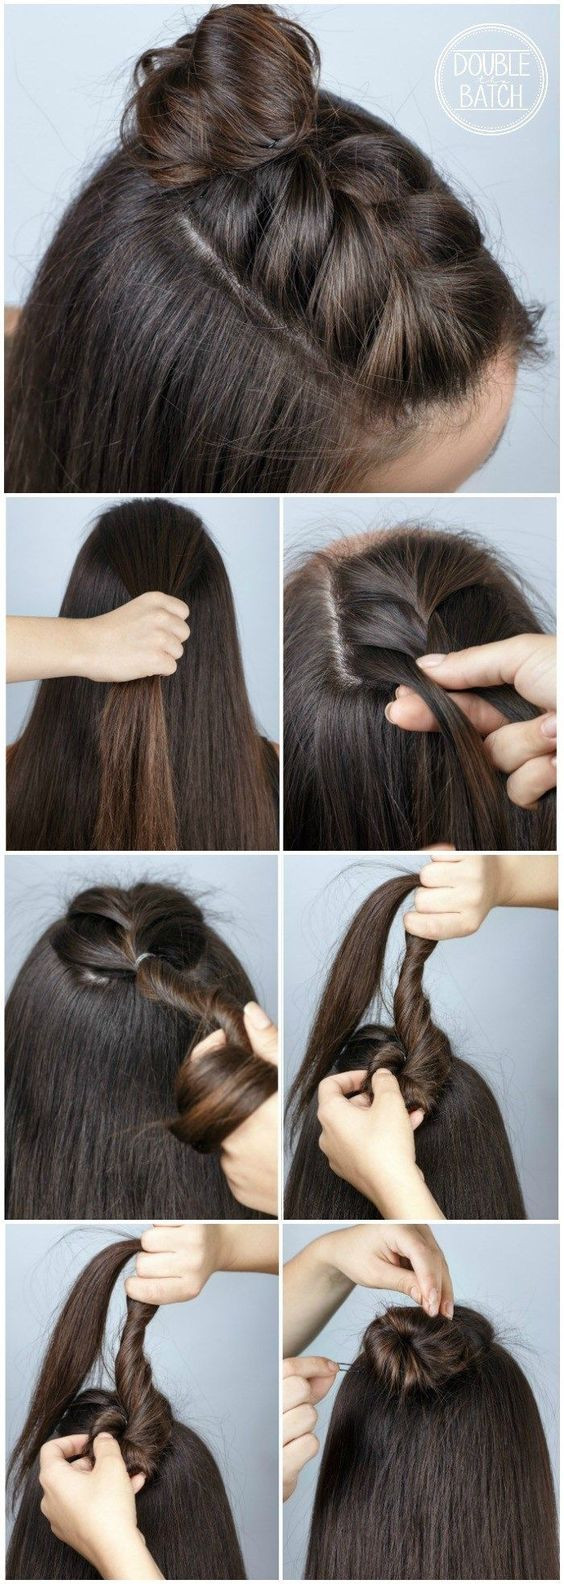 Good Easy Hairstyles
 22 Quick and Easy Back to School Hairstyle Tutorials